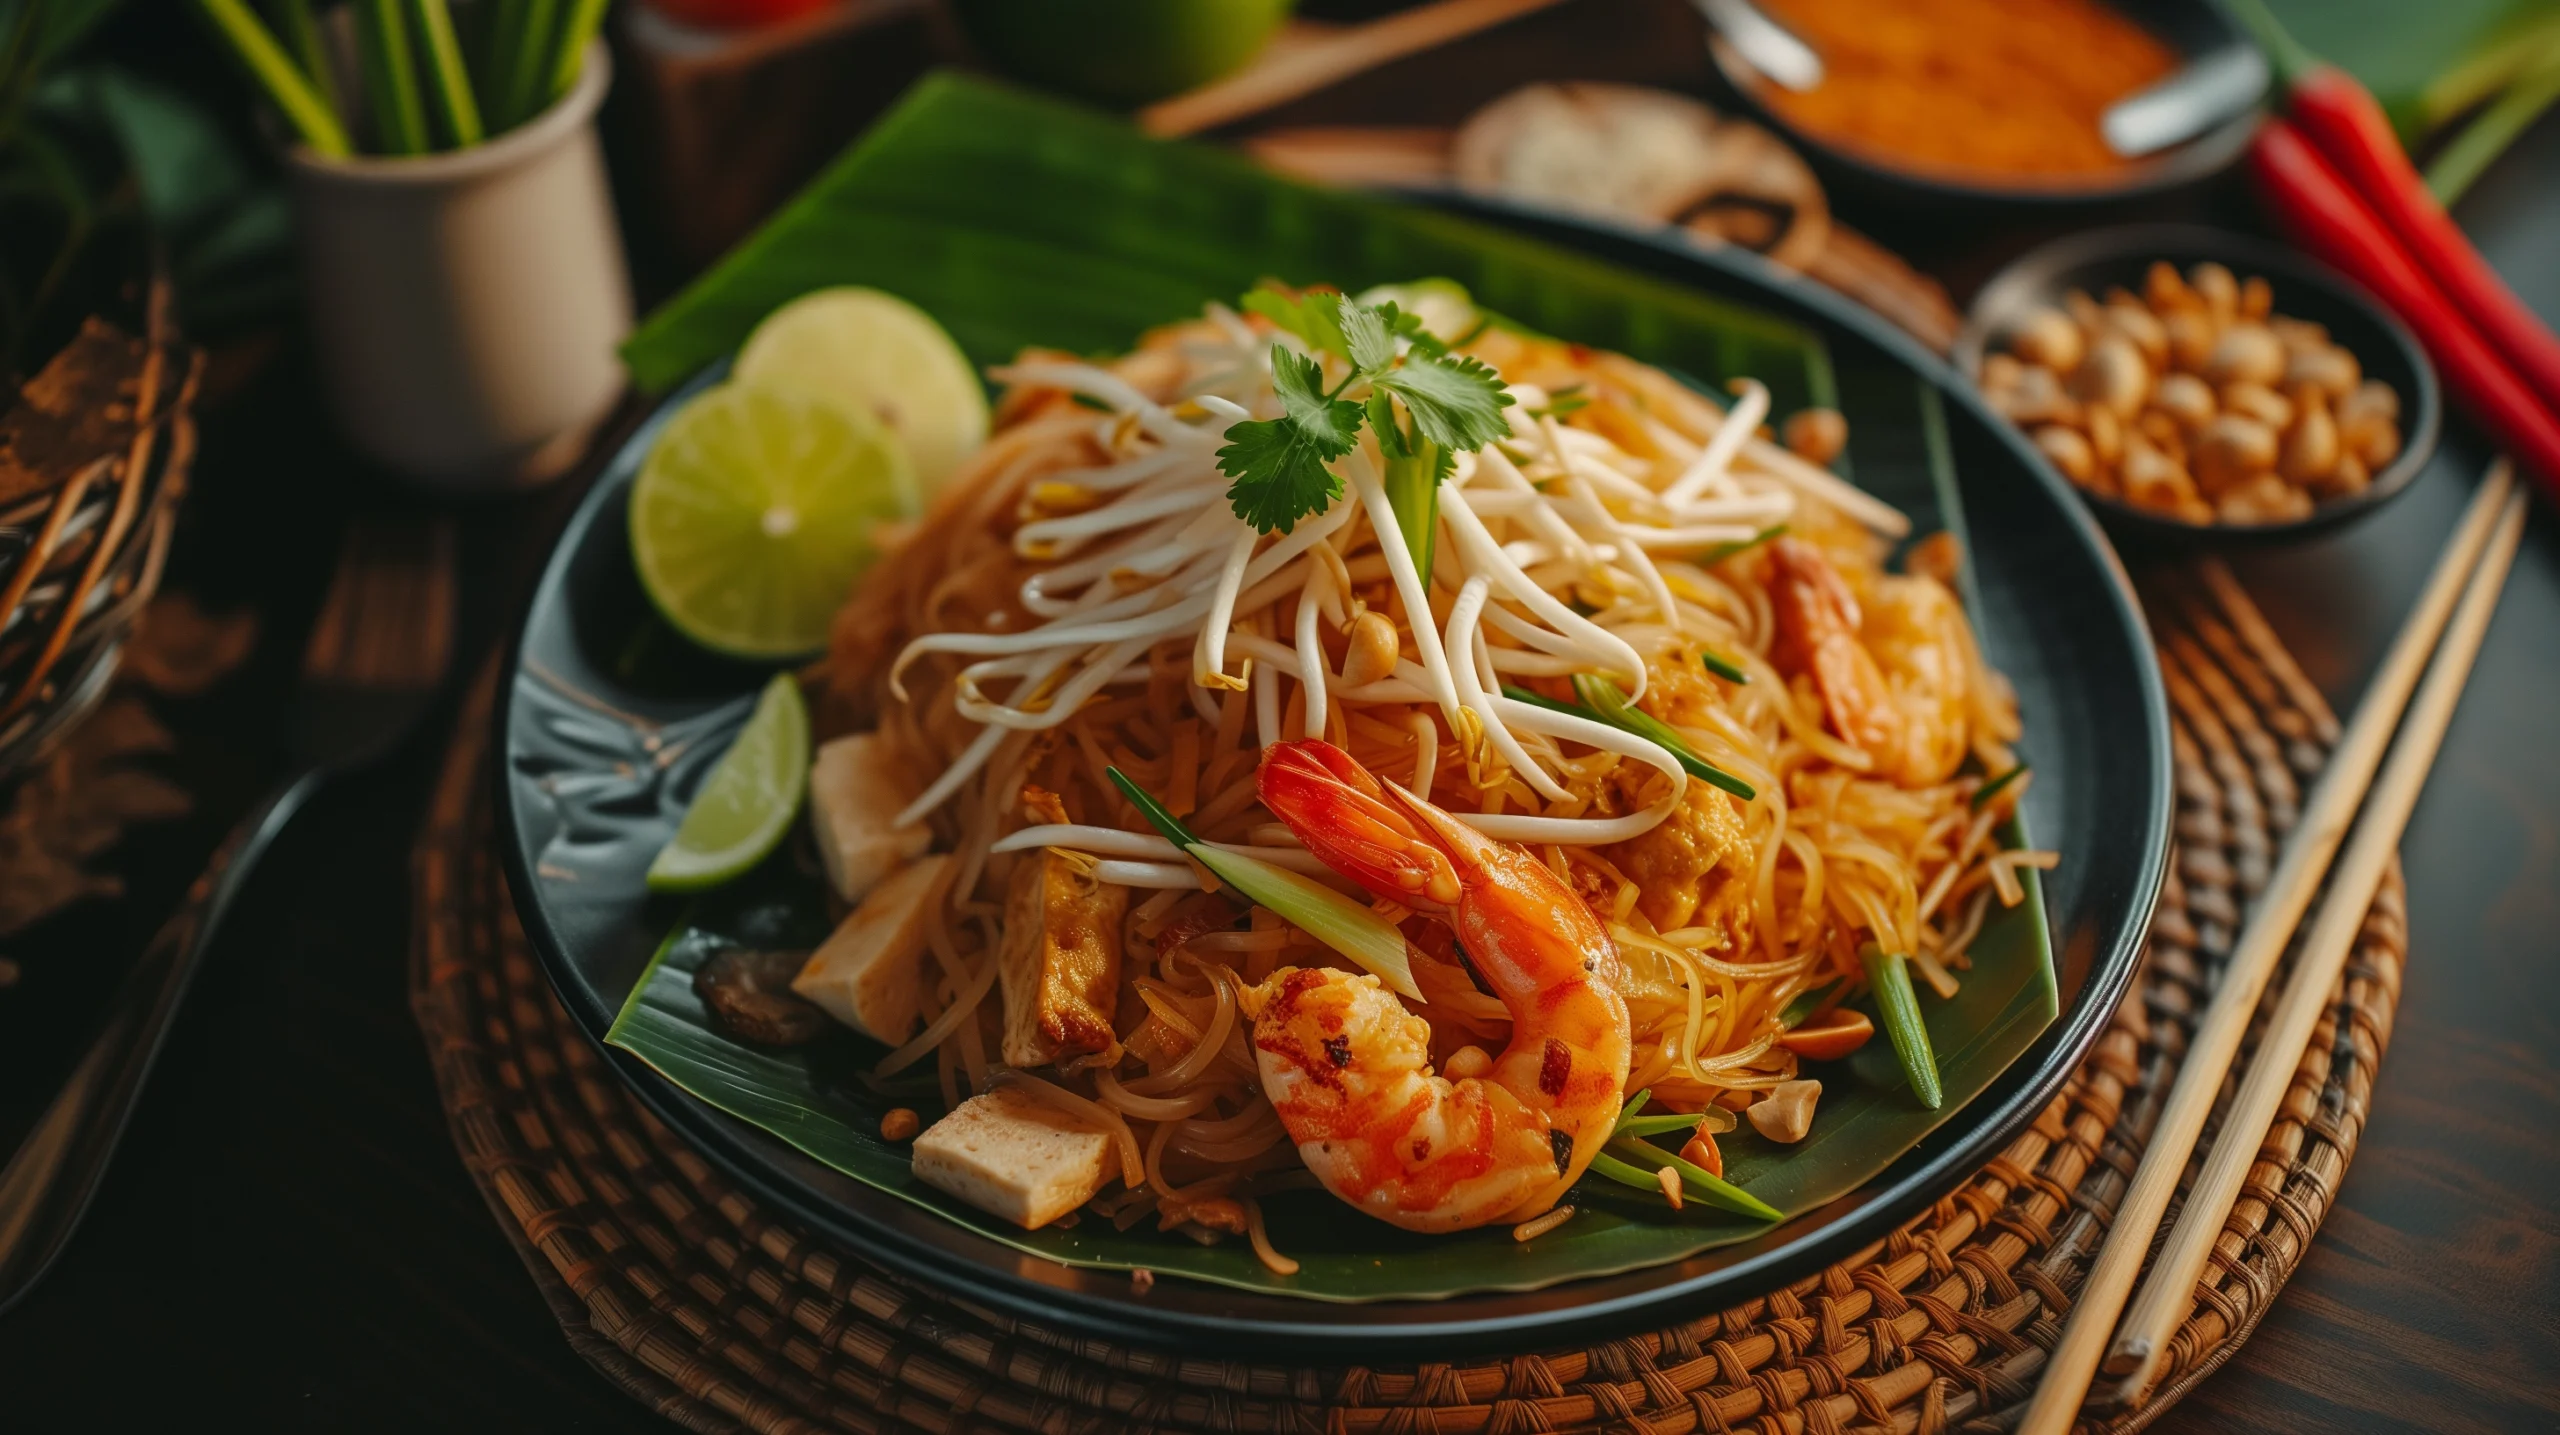 A close-up image of a vibrant bowl of Som Tam, Thai Papaya Salad, showcasing shredded green papaya, cherry tomatoes, green beans, peanuts, and fresh herbs, drizzled with a tangy dressing and garnished with chili peppers.